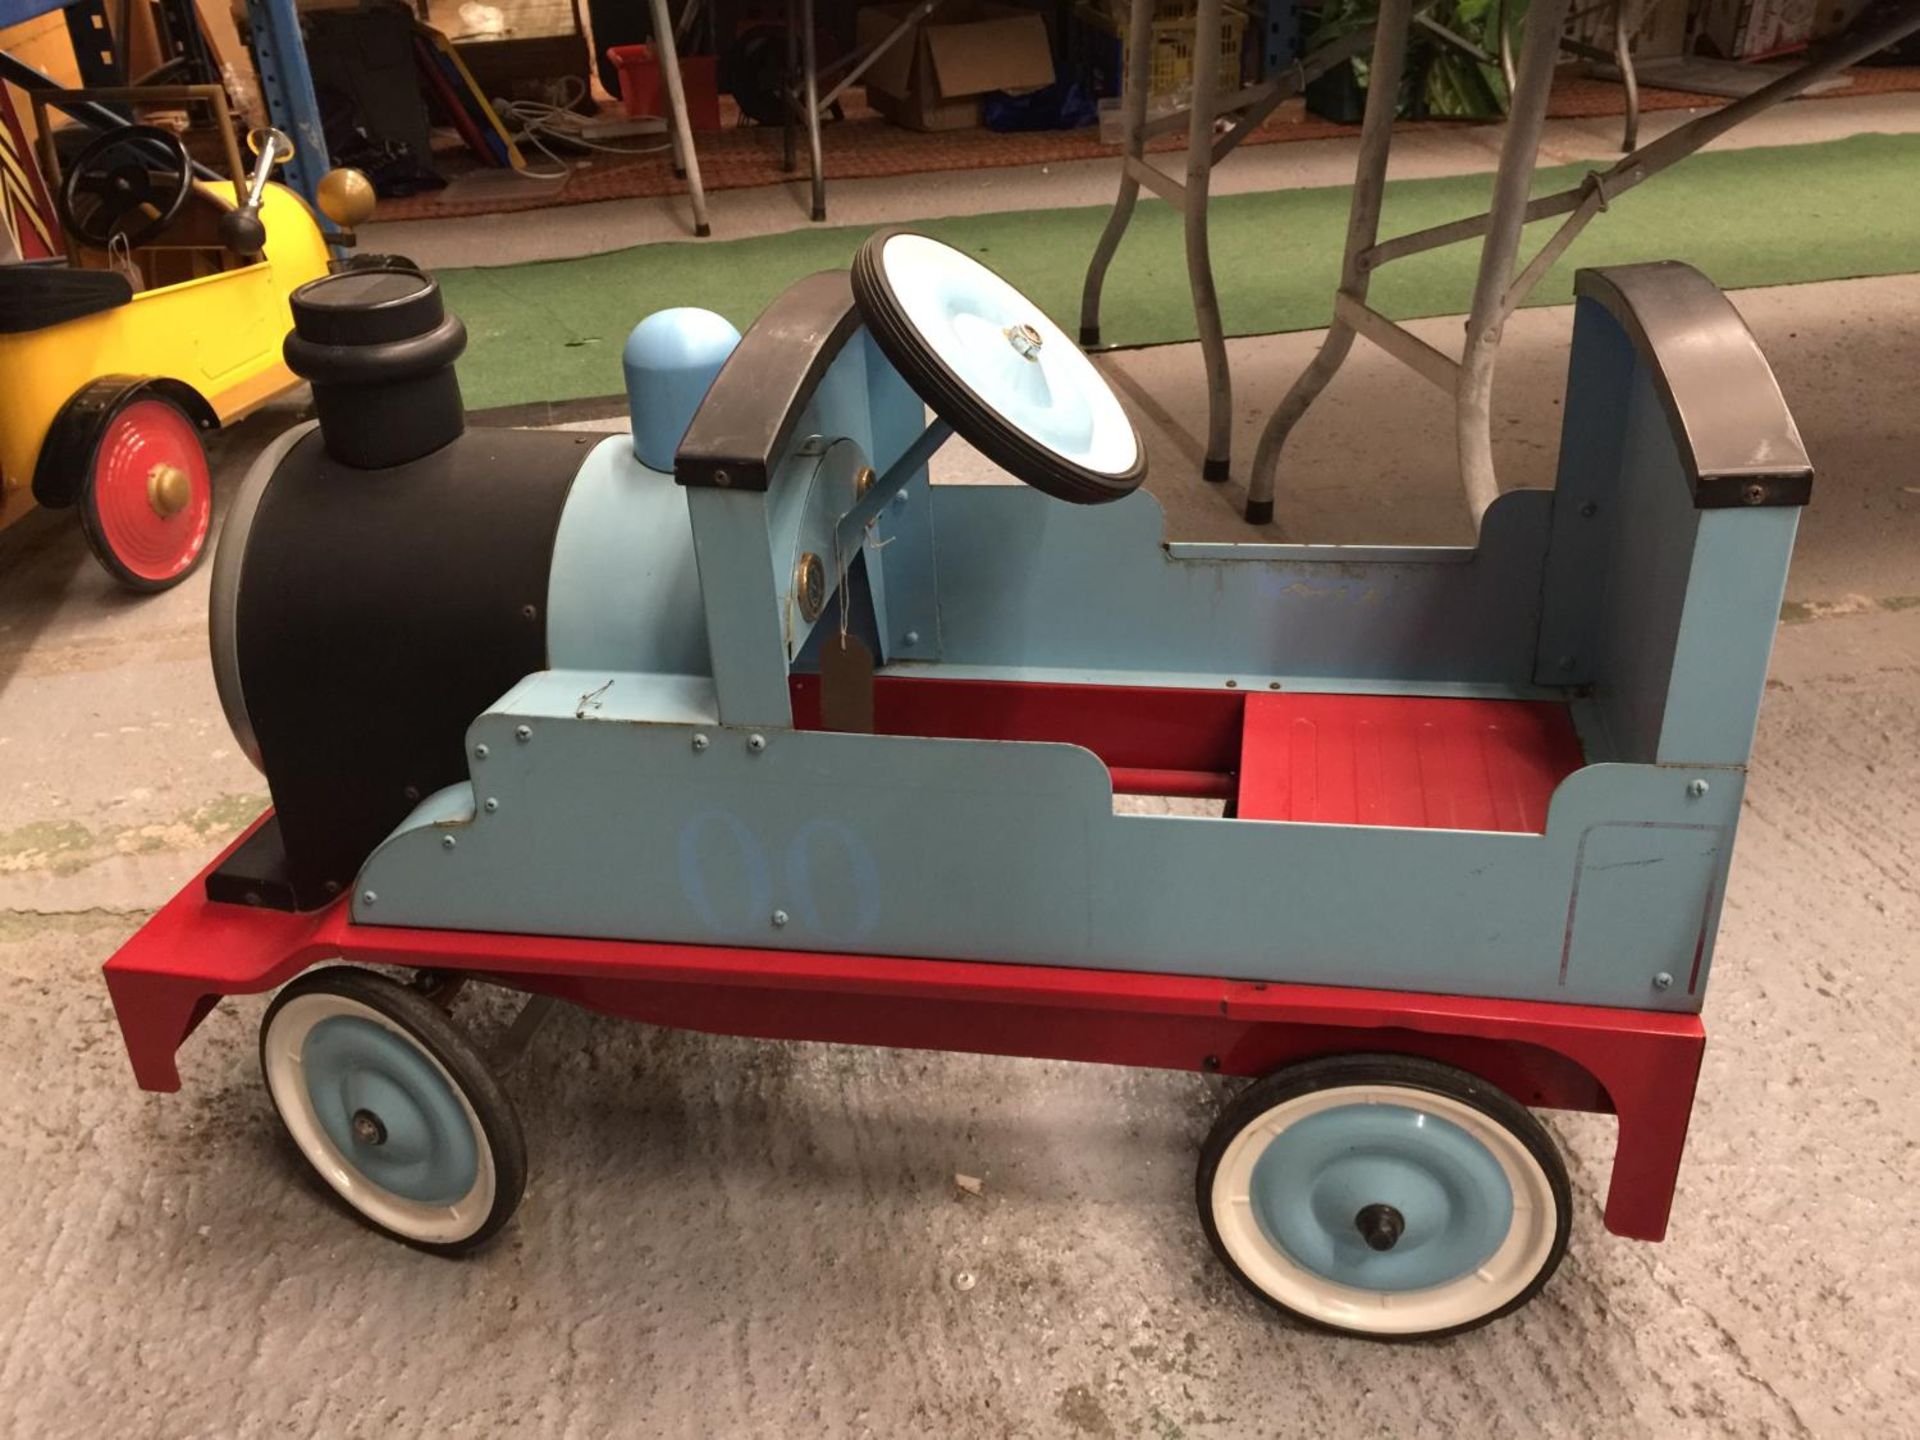 A THOMAS THE TANK ENGINE STYLE METAL PEDAL TRAIN - Image 5 of 5